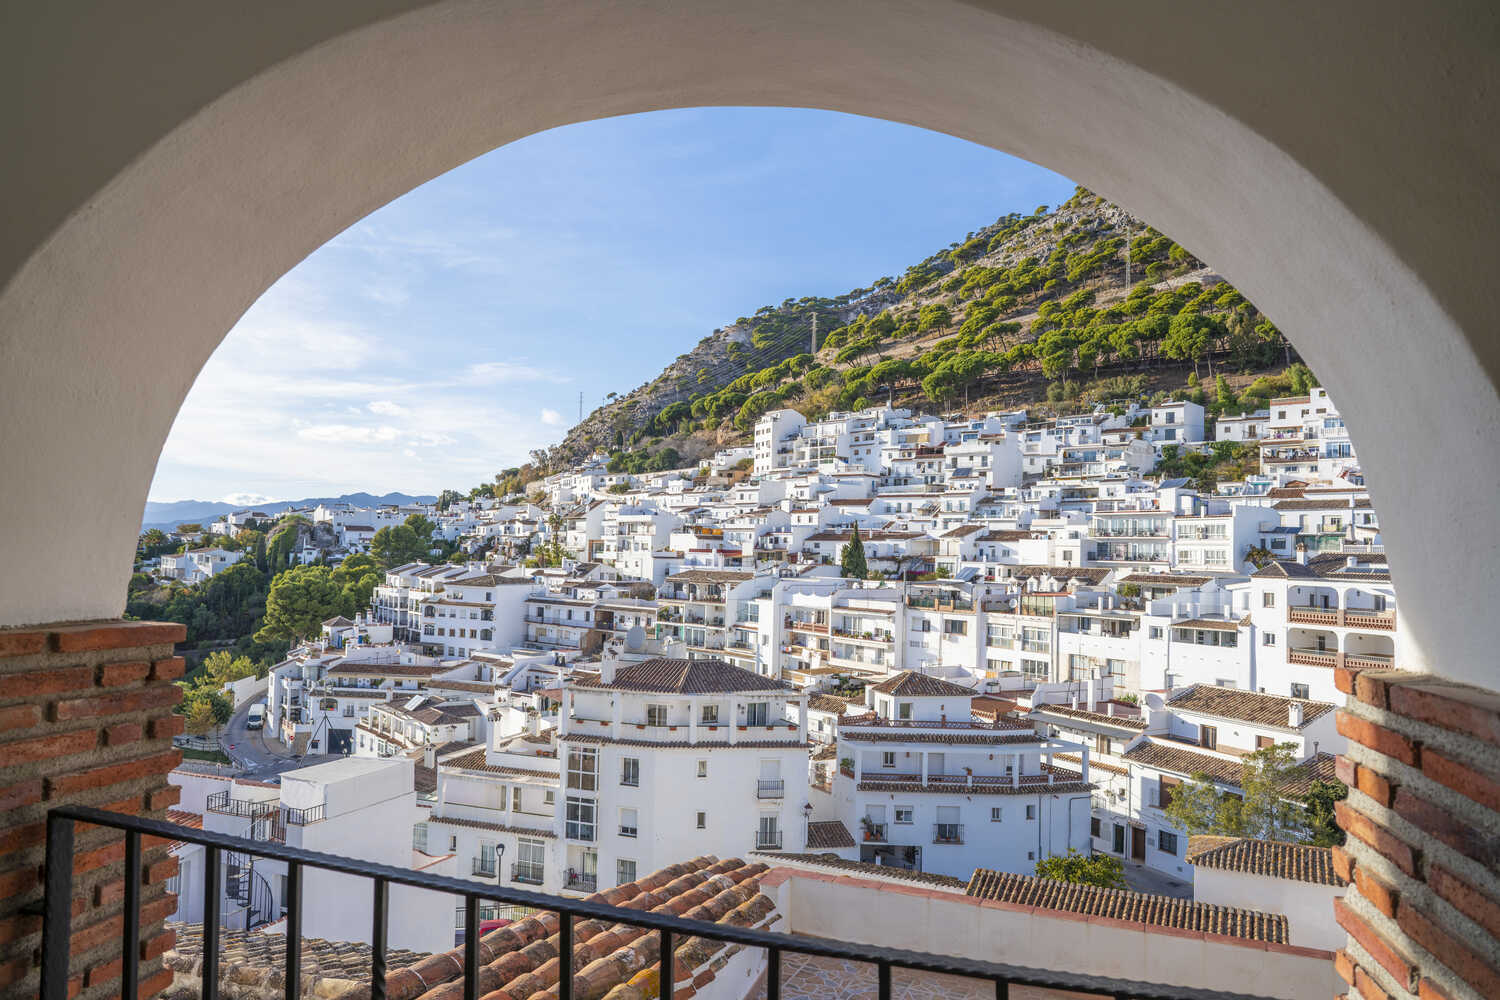 Views over Mijas - The Perfect Southern Spain Road Trip Itinerary